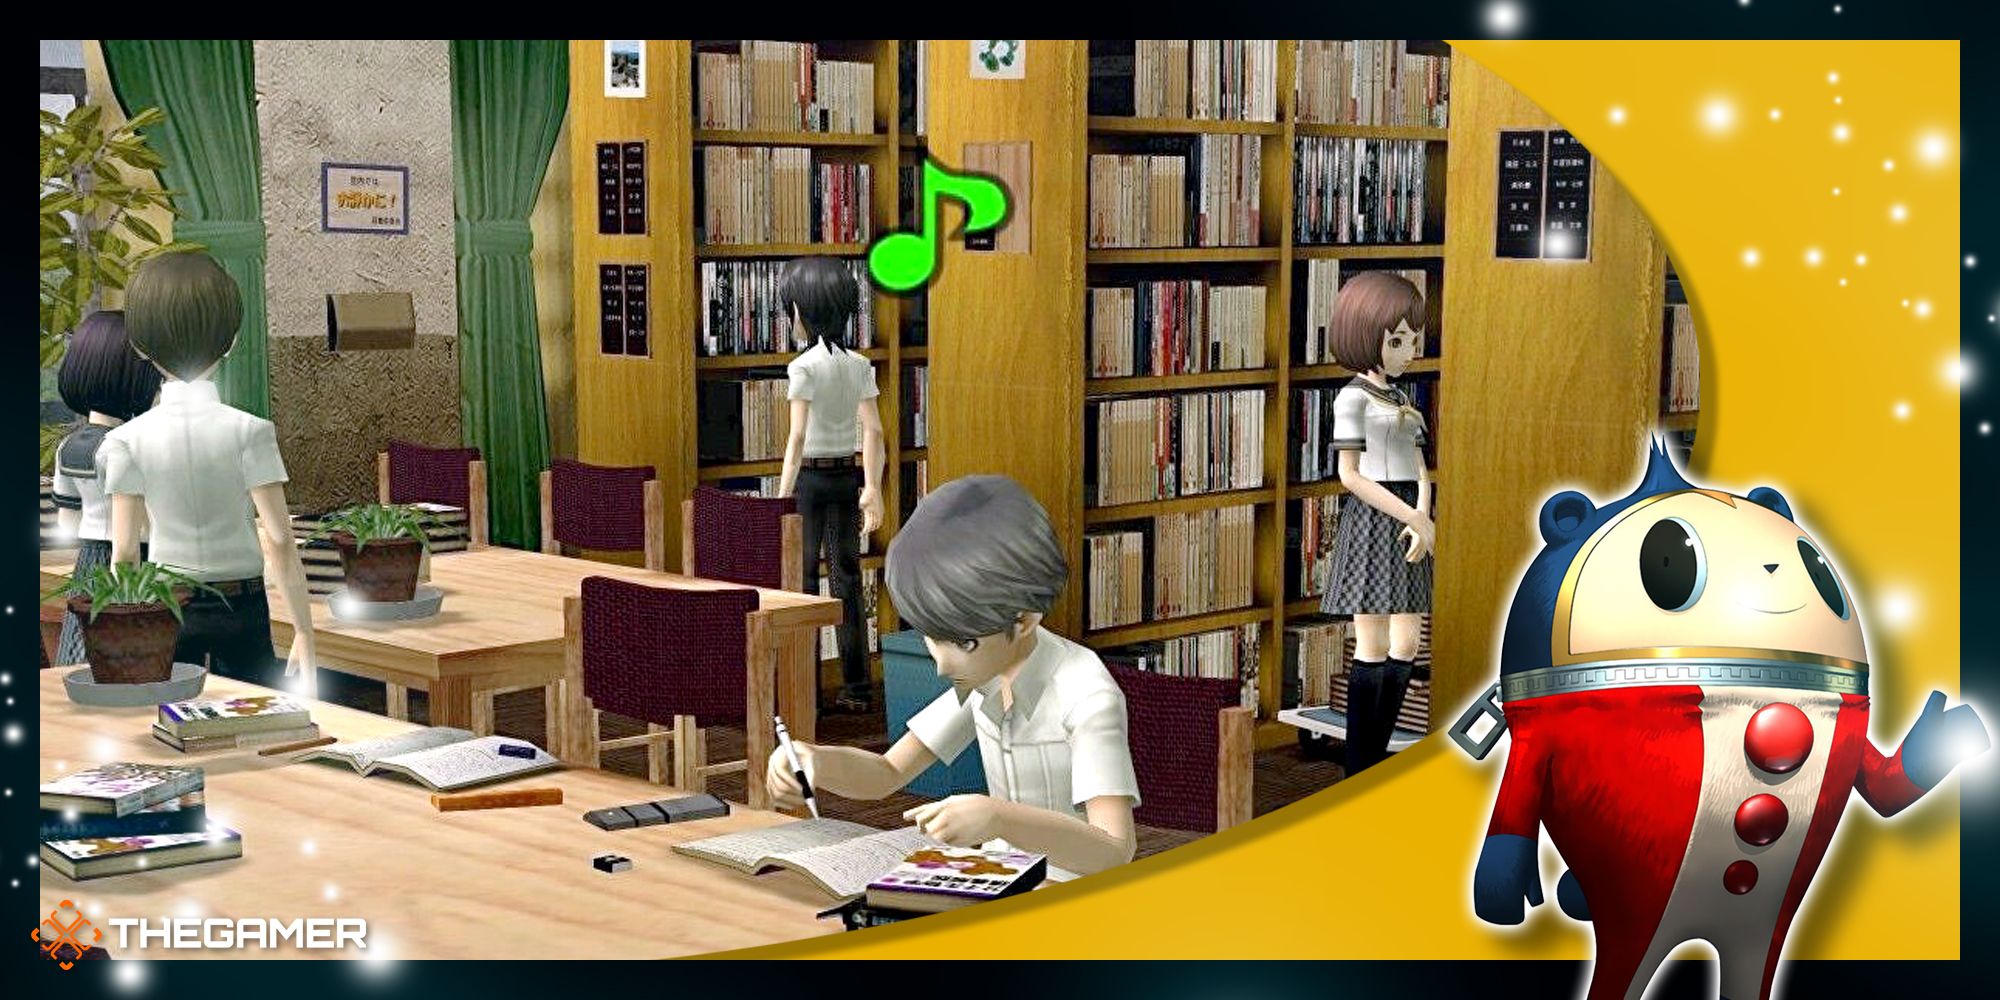 Persona 4 Golden - Yu studying in the library with a Teddie overlay in the corner.